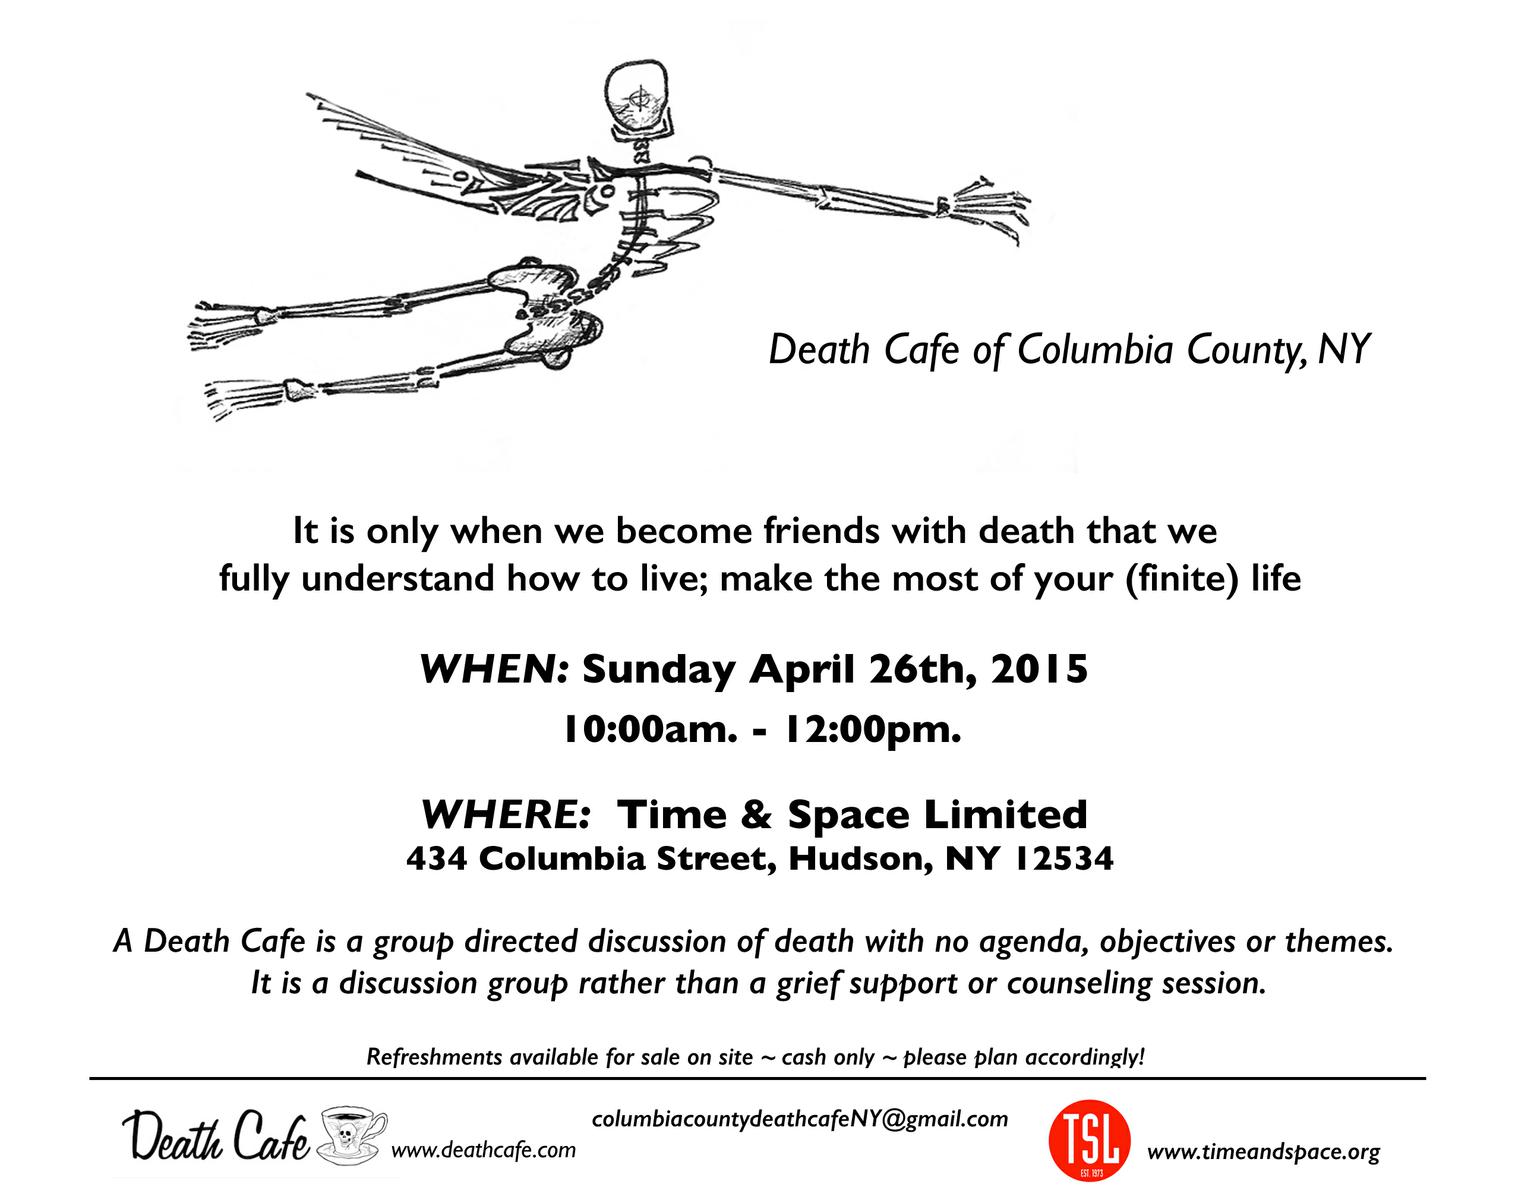 Death Cafe in Columbia County, NY